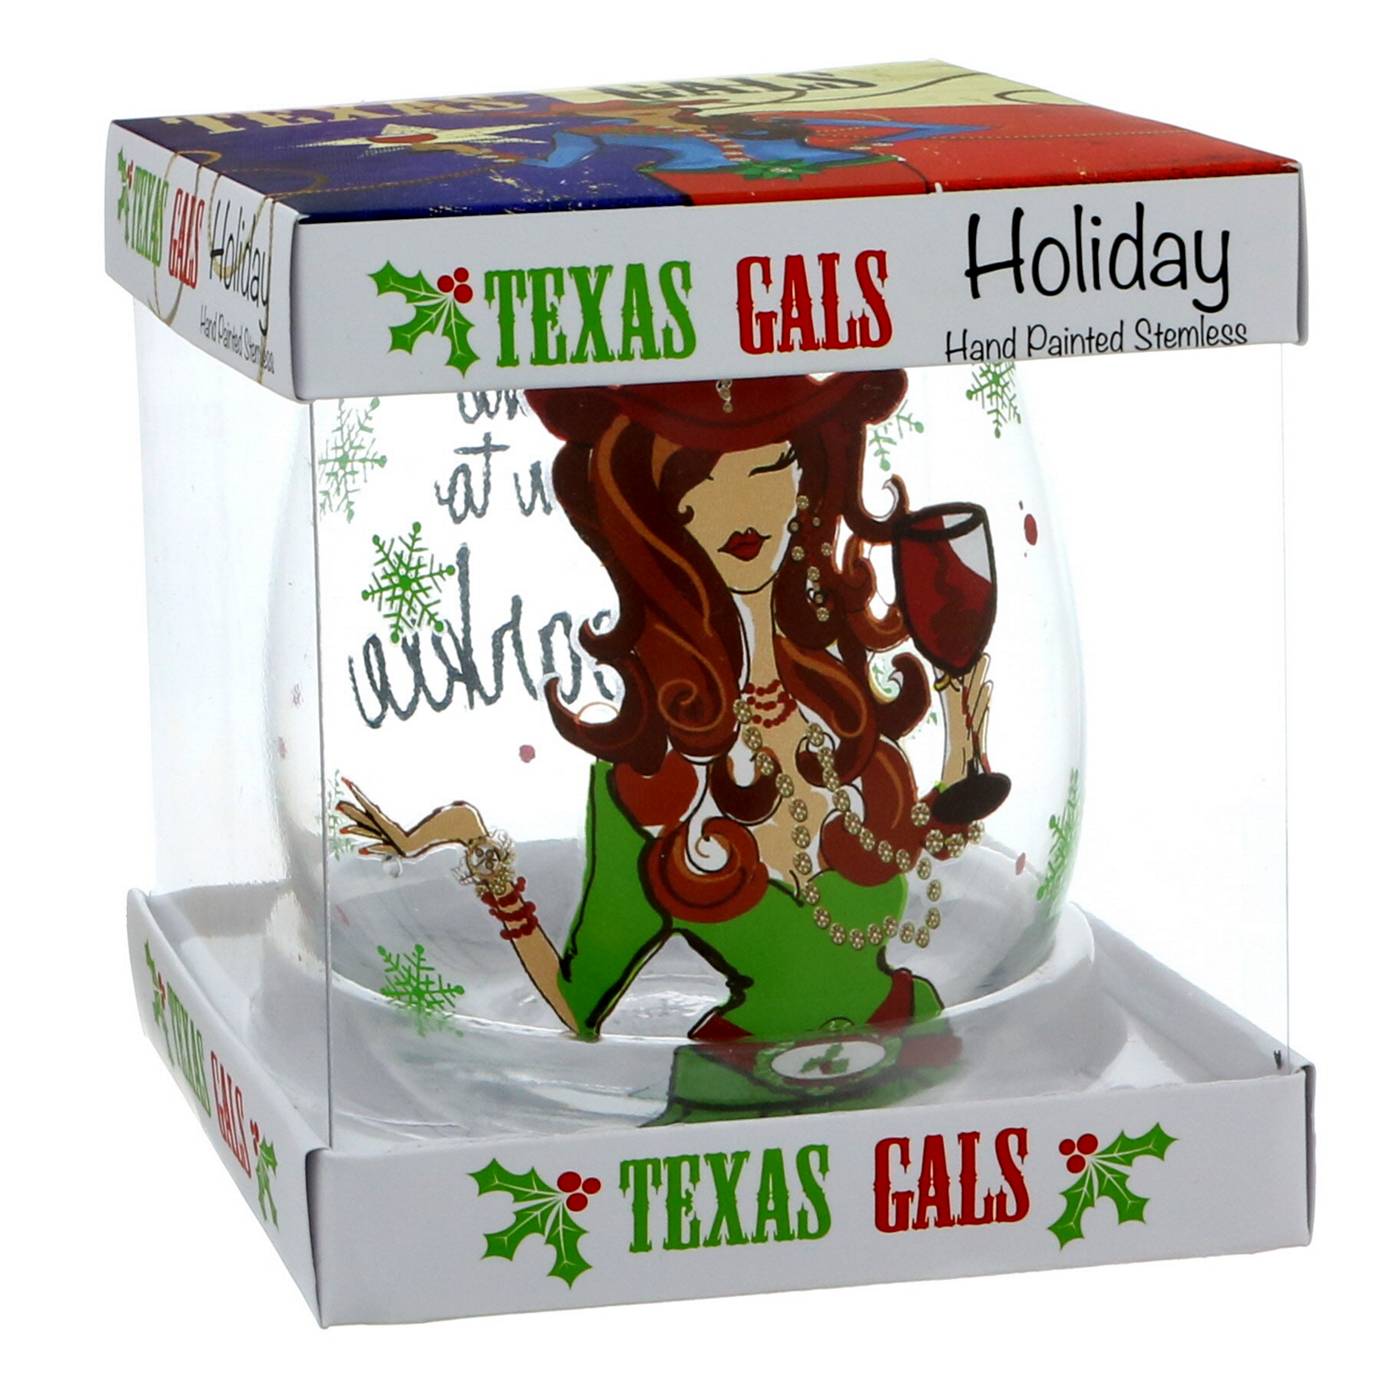 Jay Imports Texas Gals Holiday Stemless Wine Glass, Designs May Vary; image 2 of 3